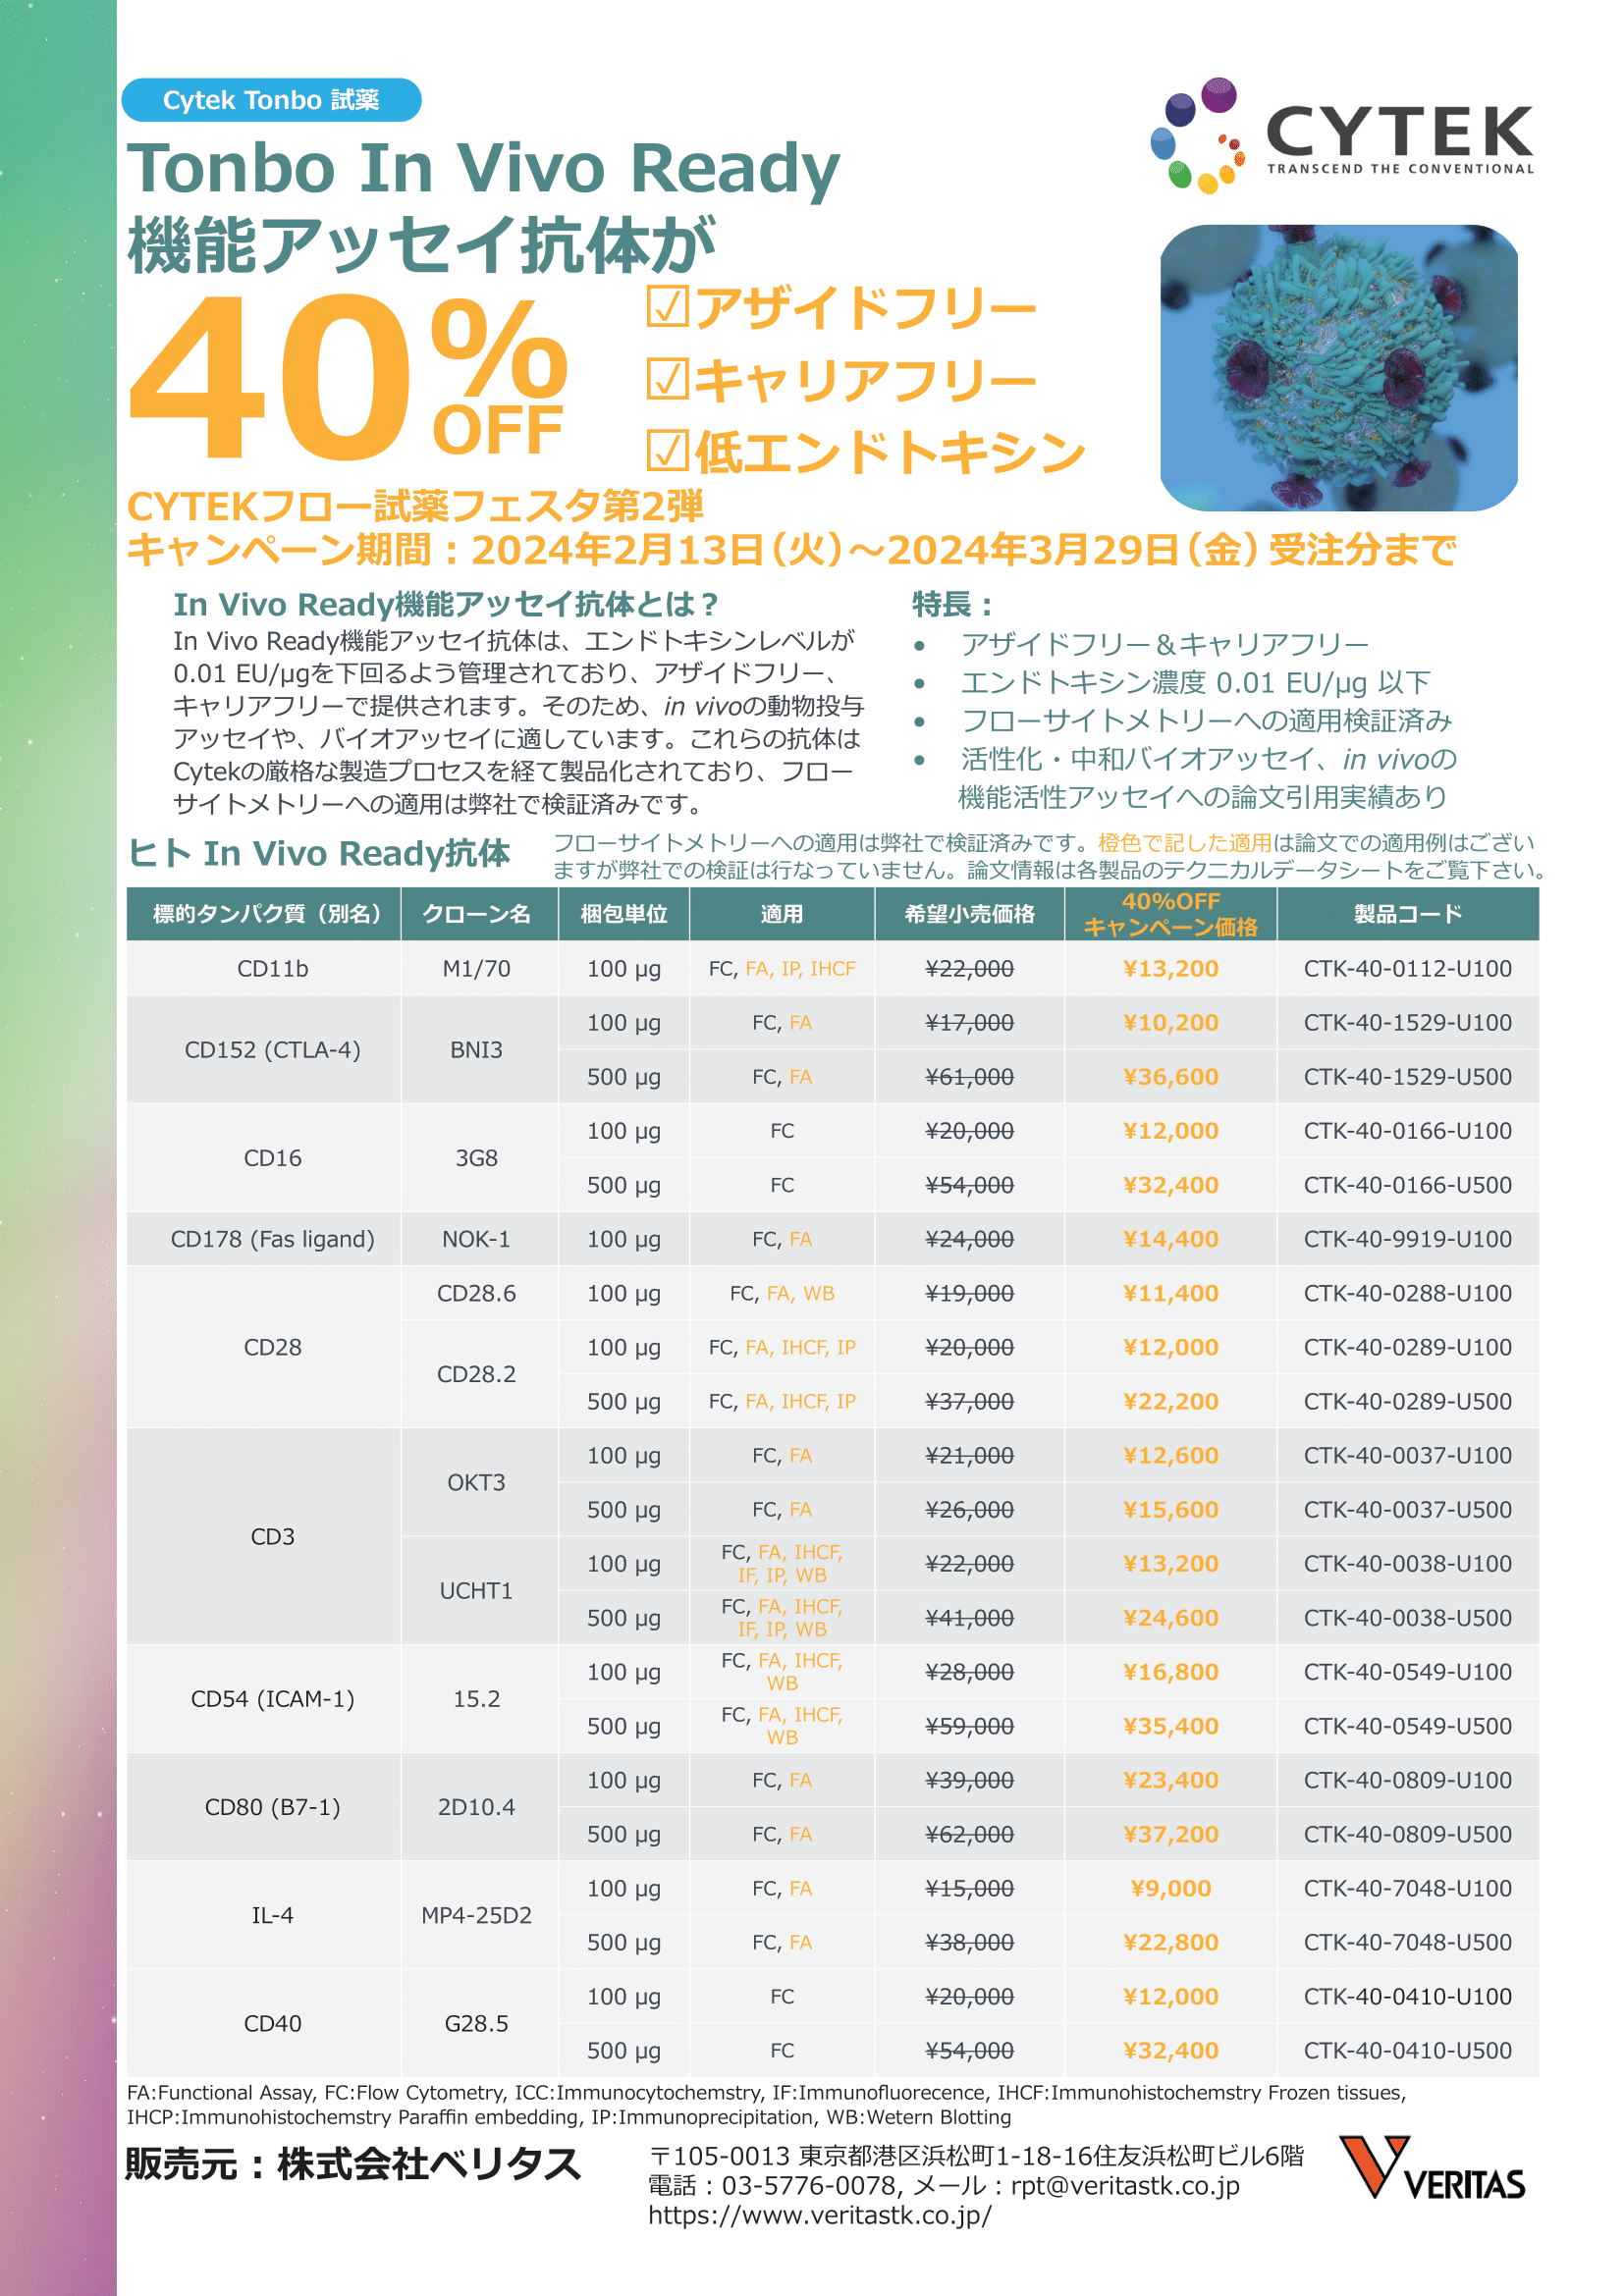 Tonbo In Vivo Ready_flyer-1.png